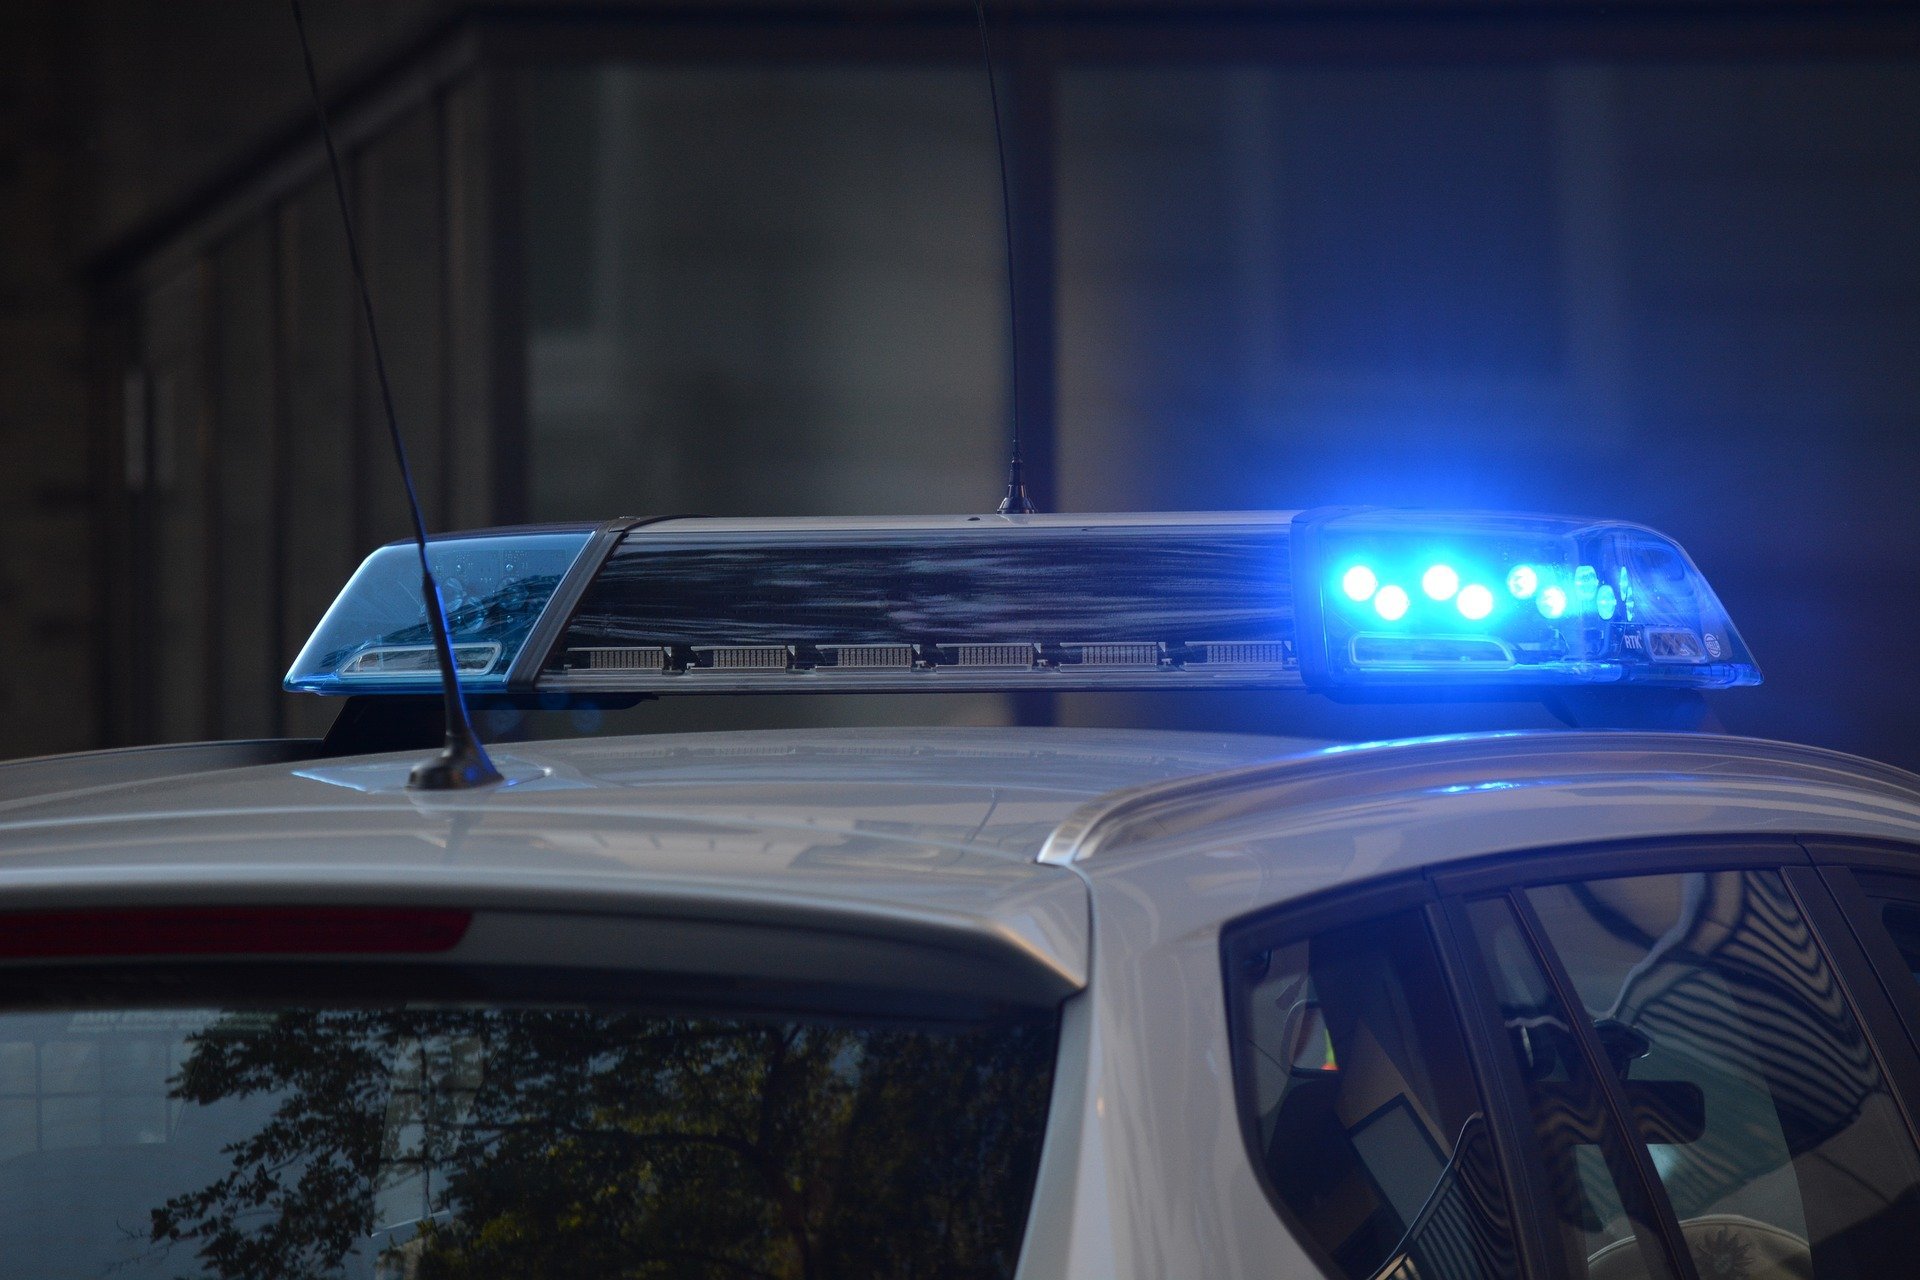 A police car with flashing blue lights at night. | Source: Pixabay